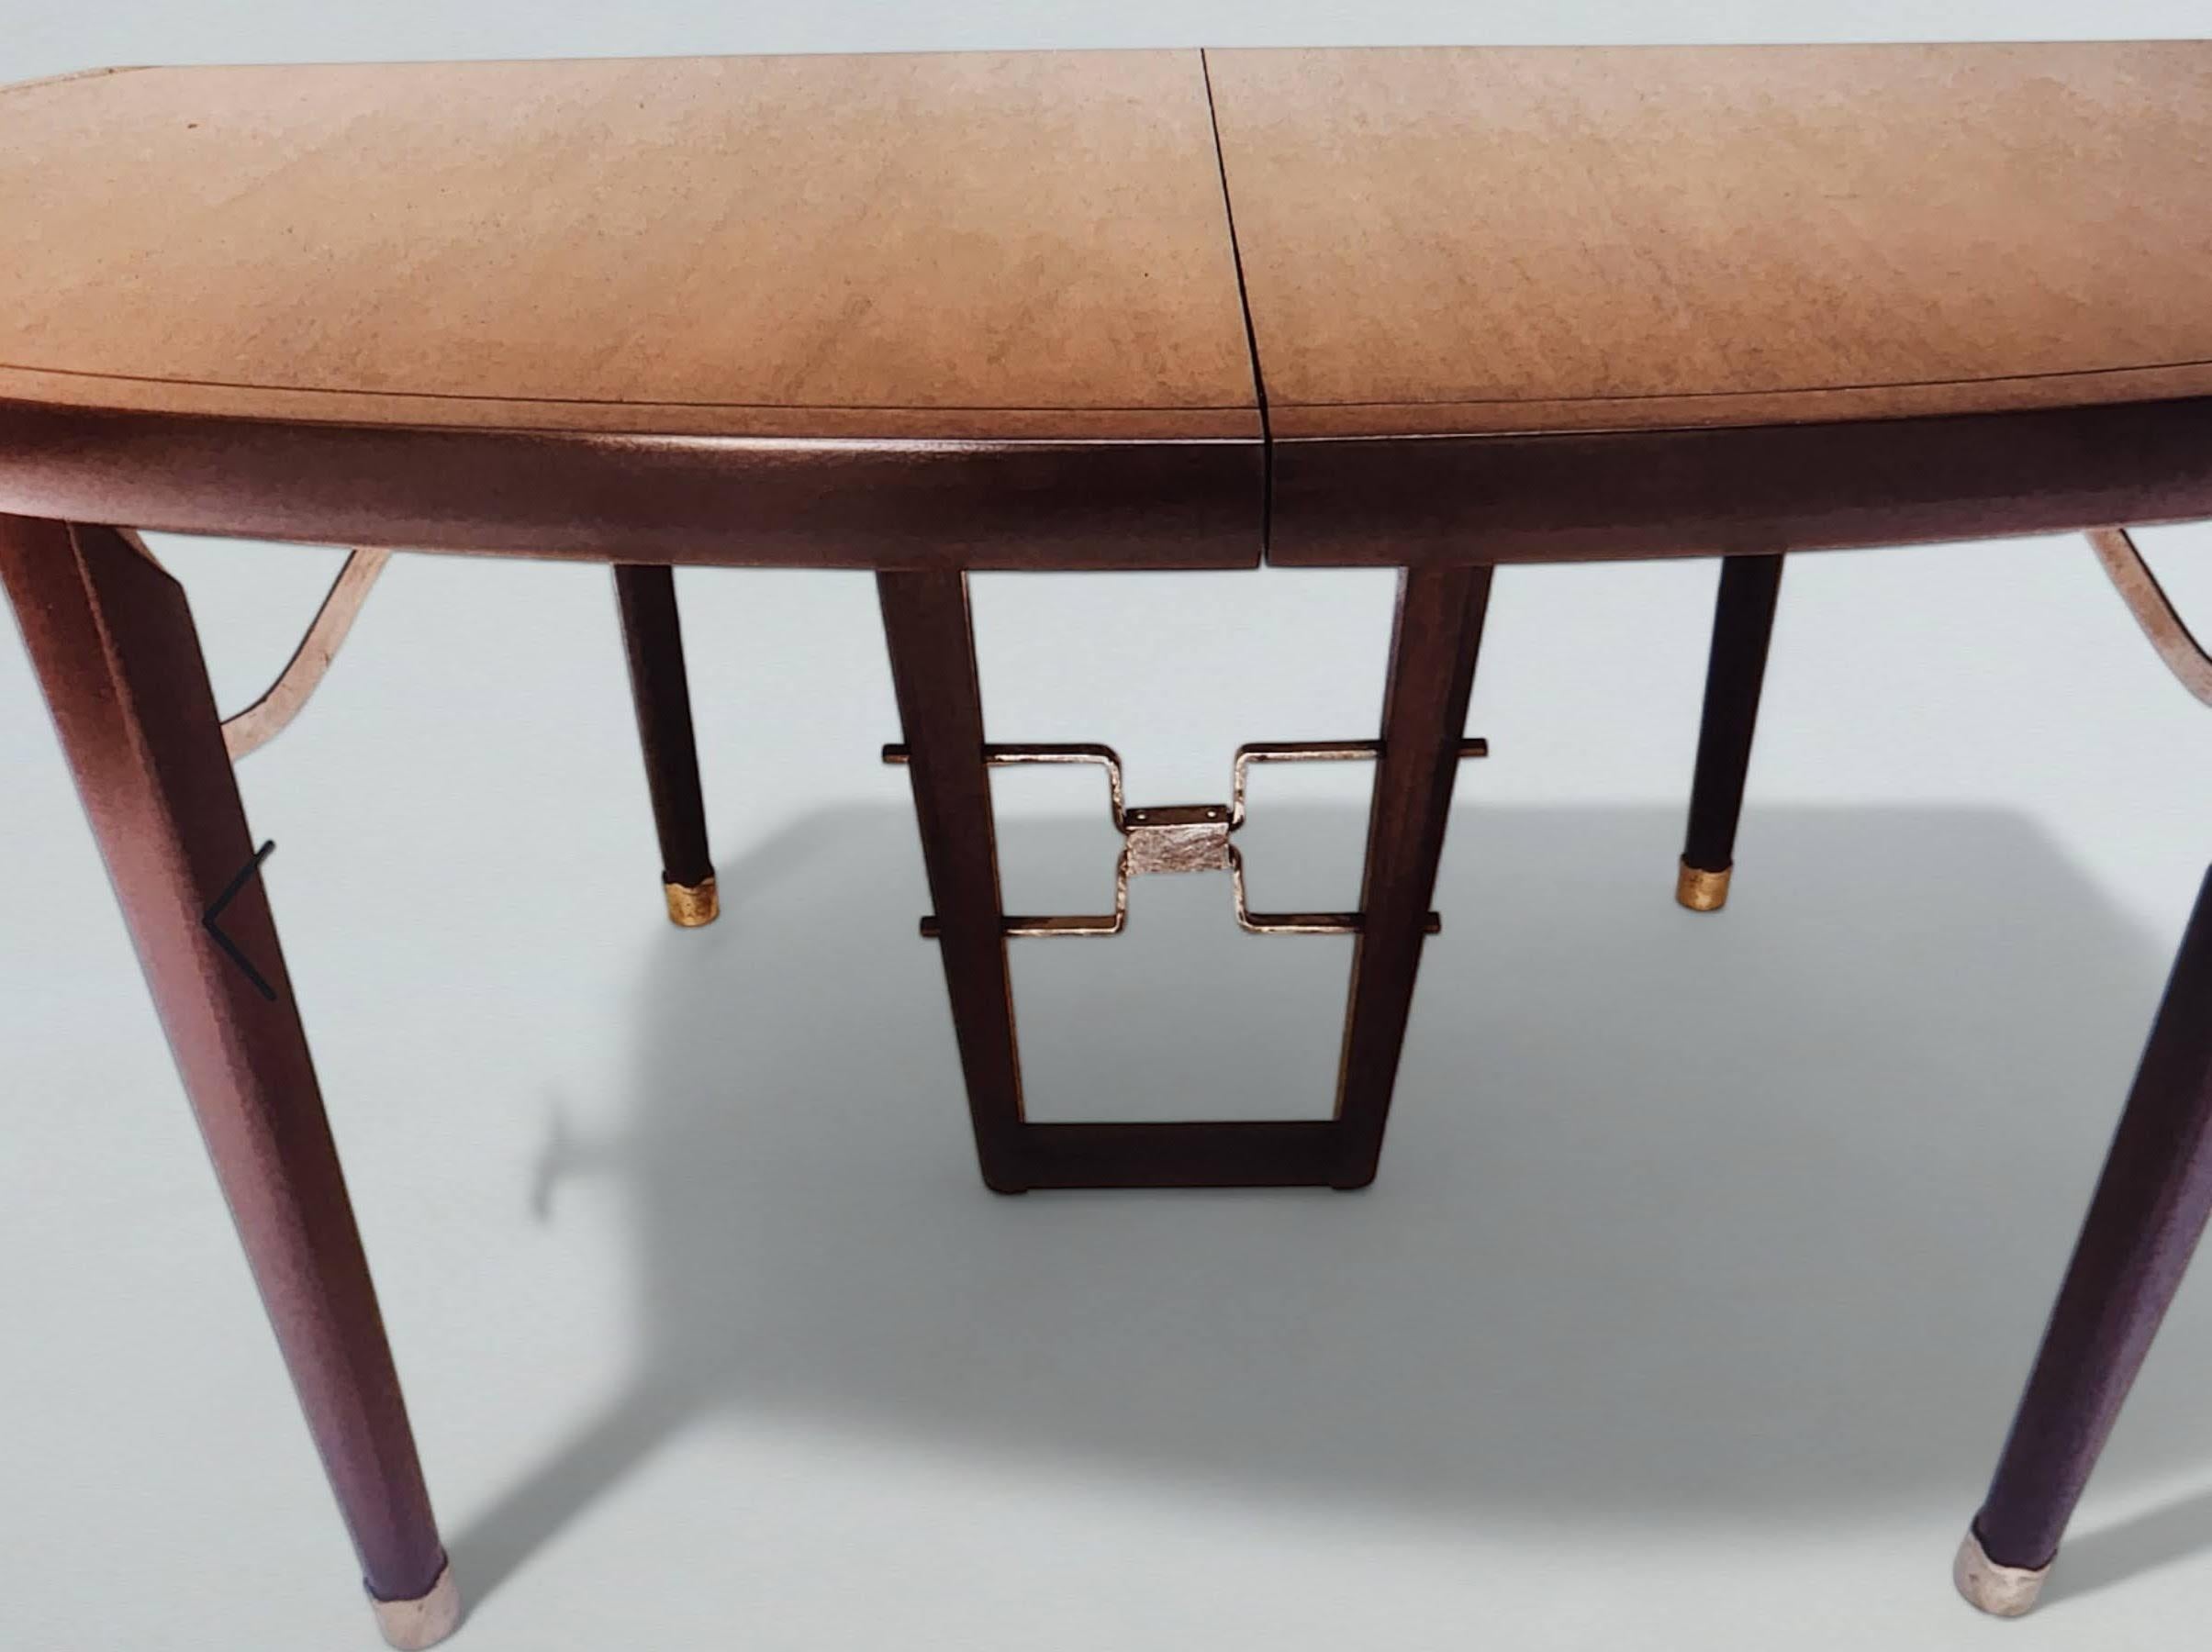 Mid-20th Century Edmond Spence Mahogany Dining Table Designed for Industria Mueblera, circa 1958 For Sale